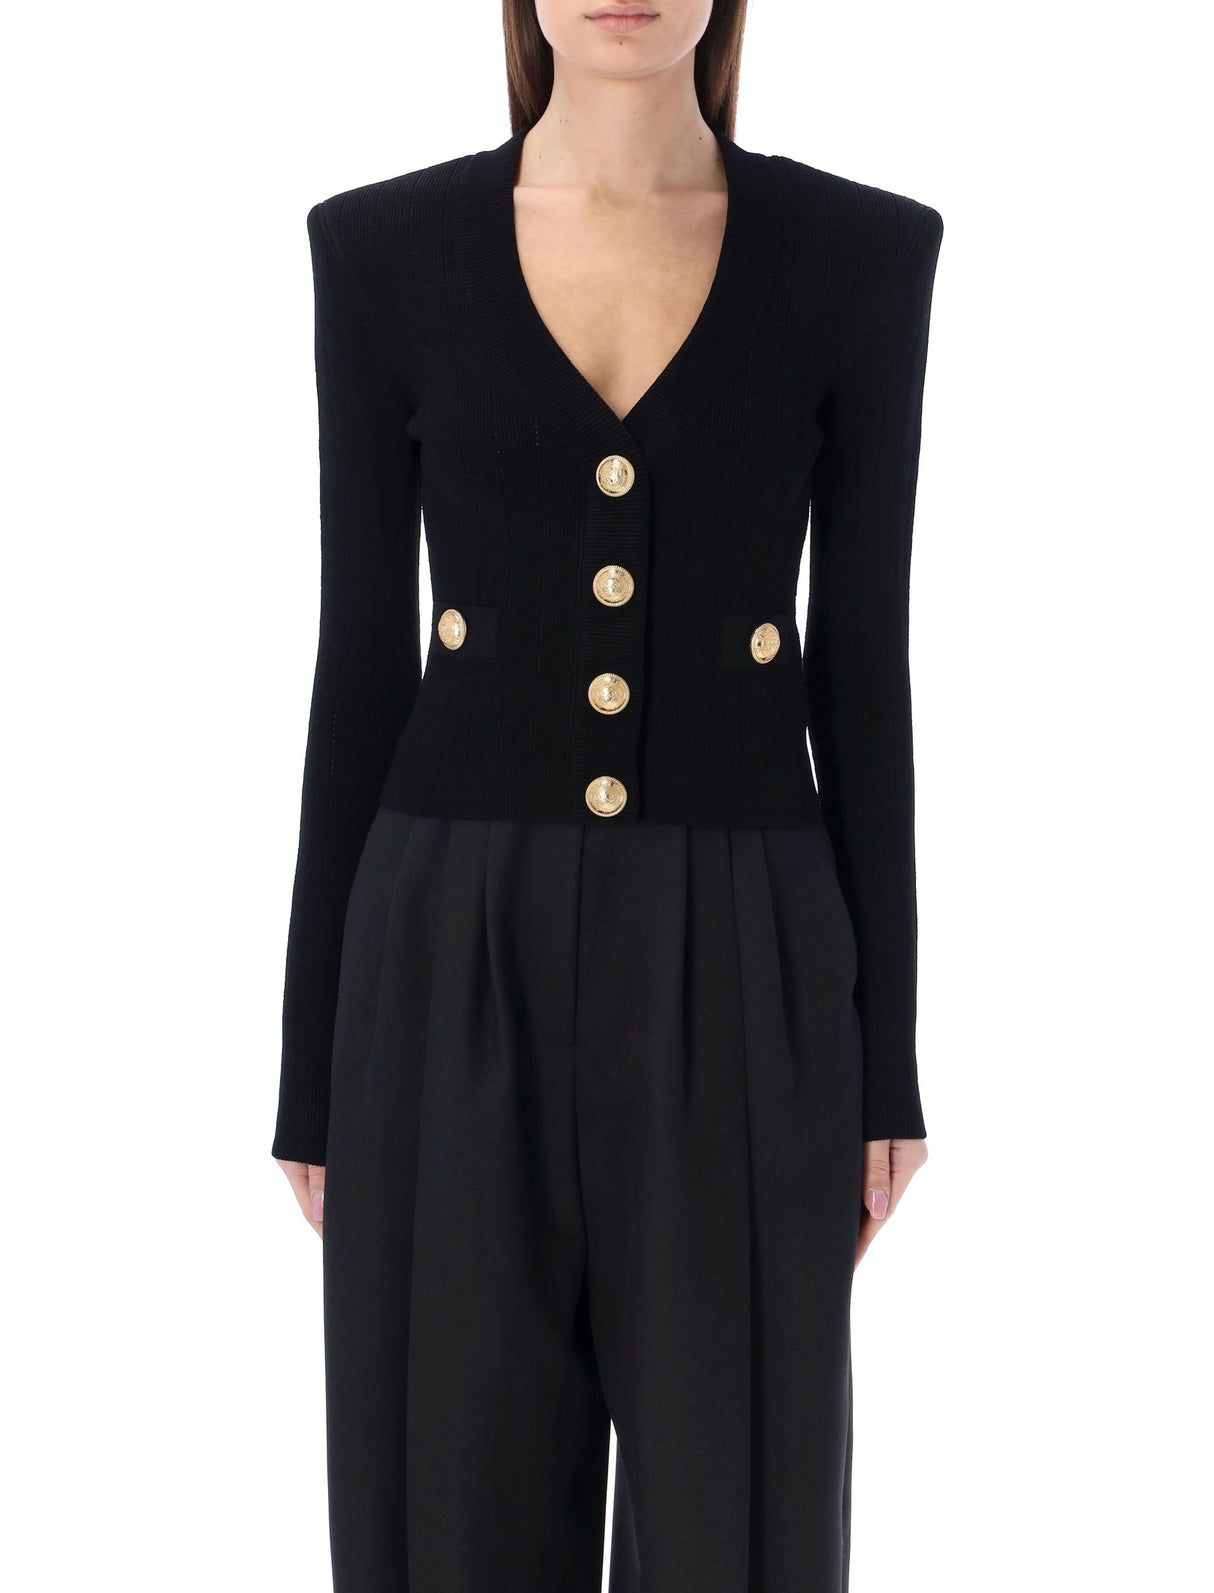 Exquisite Gold Button Knit Cardigan for Women by BALMAIN